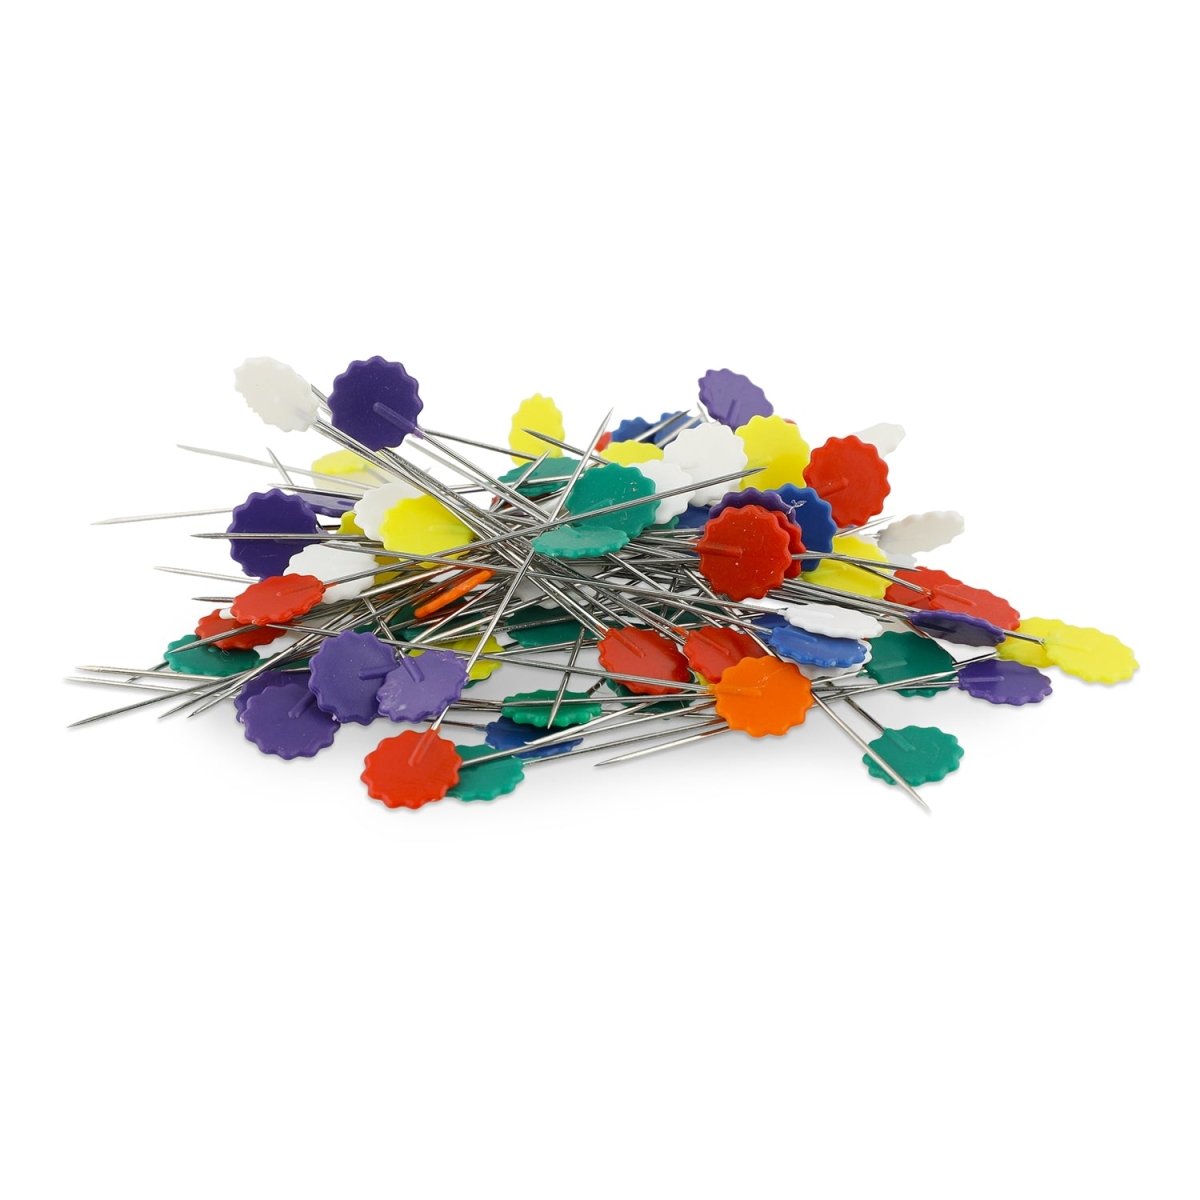 Long Flower Pins - 200 Pin Value Pack - 7 Bright Colors/Box